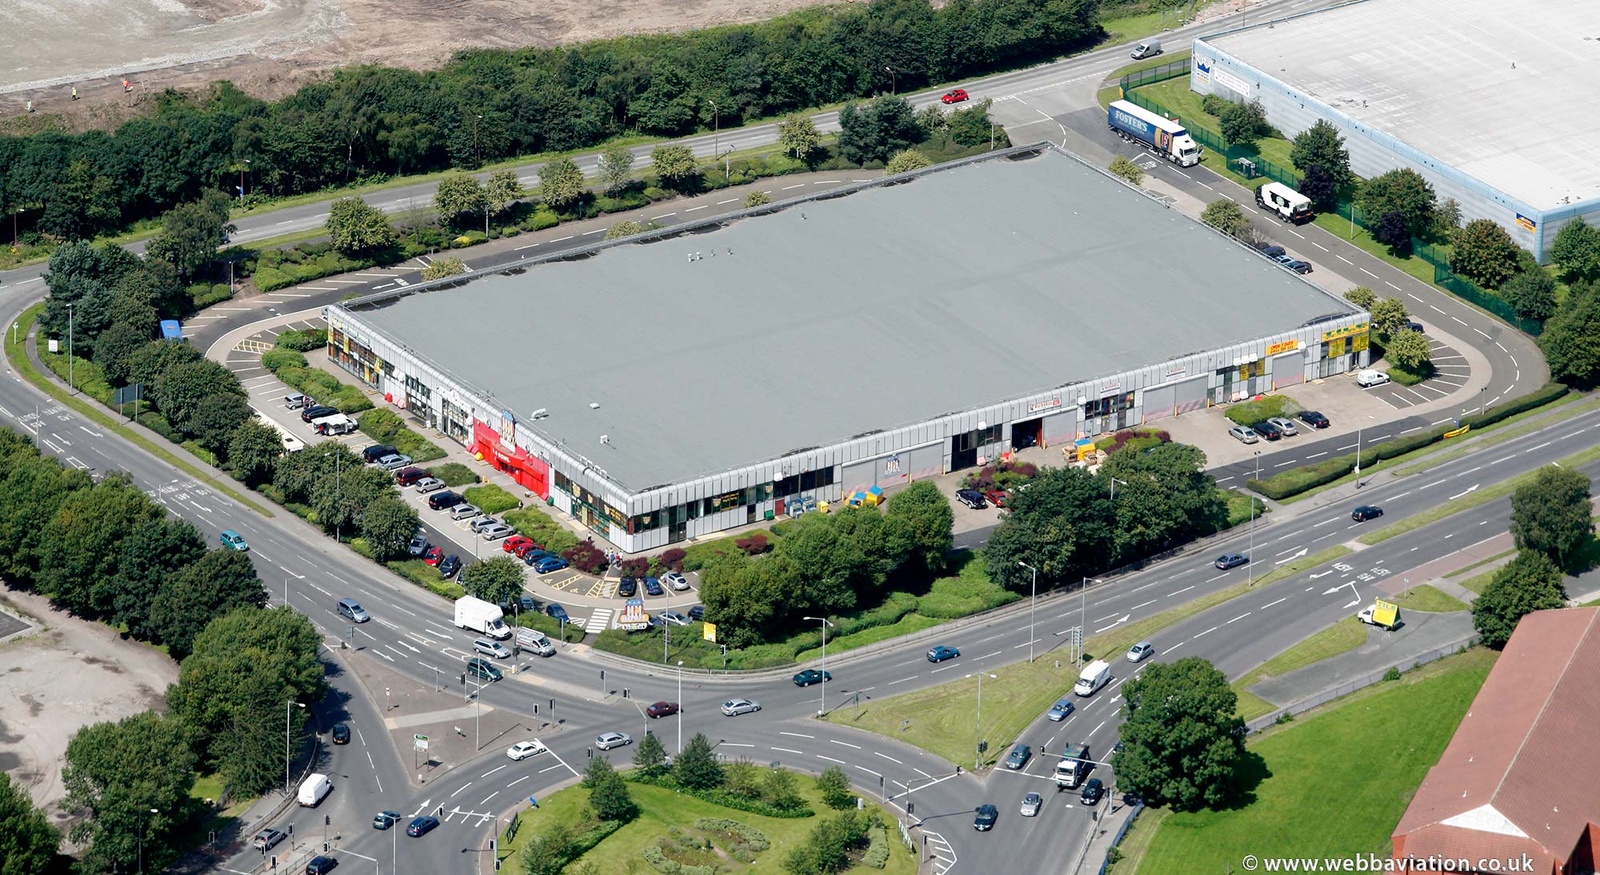 Pinners Brow Retail Park from the air